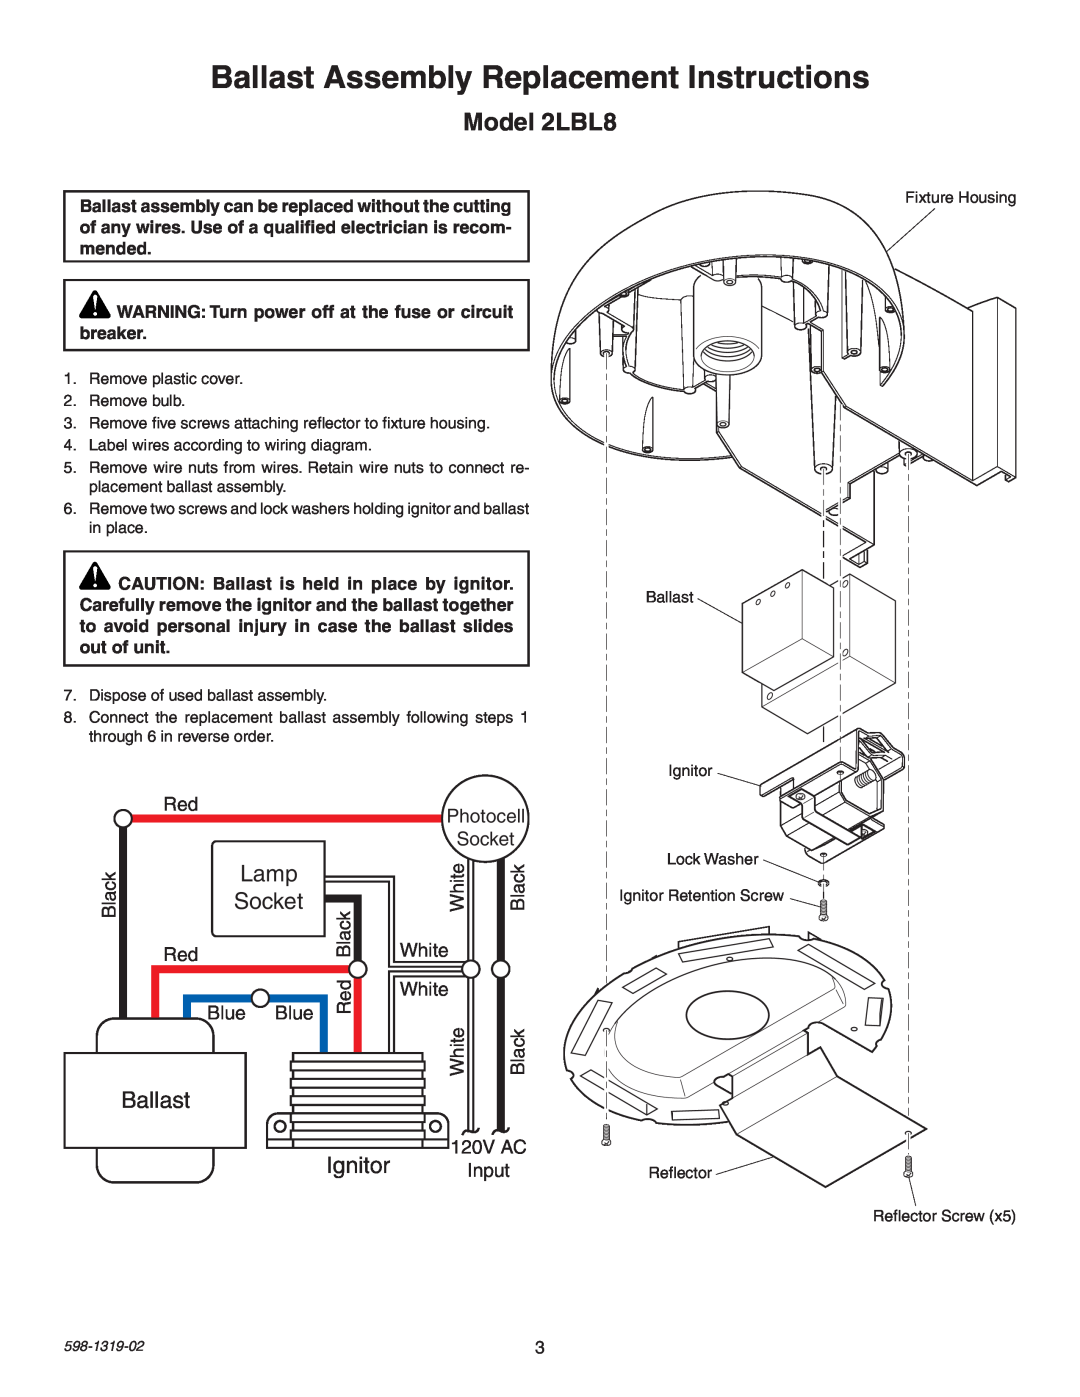 Heath Zenith 2LBL7 manual Model 2LBL8, Lamp, Socket, Ignitor, Ballast Assembly Replacement Instructions 